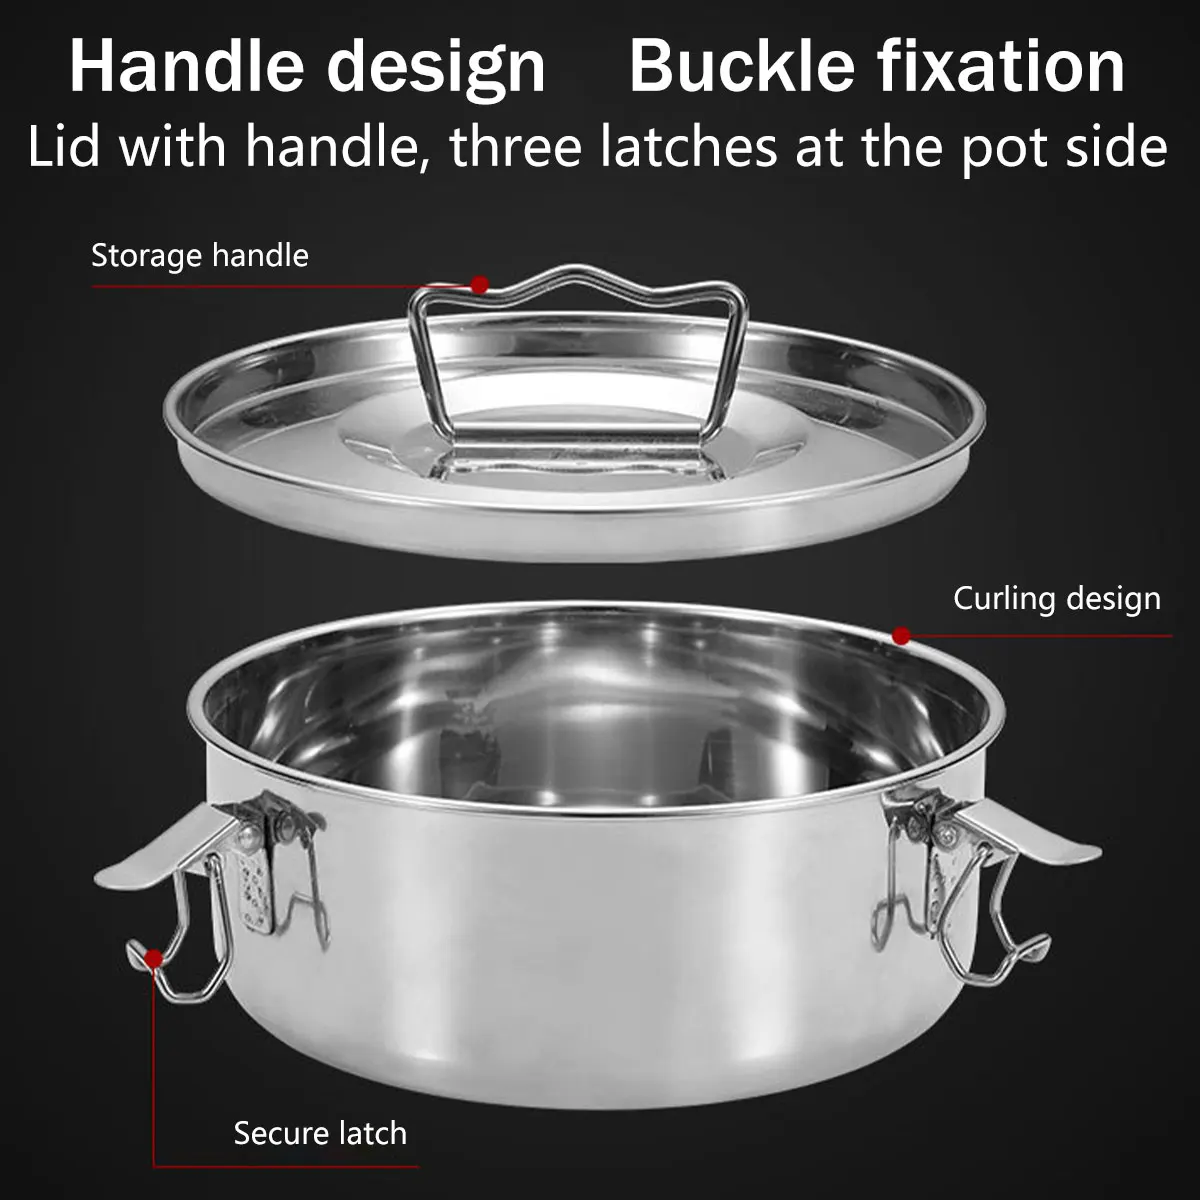 https://ae01.alicdn.com/kf/Sb065c61692c0495381c6f61444971d2dn/Stainless-Steel-Flan-Pan-Mold-with-Lid-and-Handle-1-5QT-Capacity-Portable-Flanera-Flan-Mould.jpg